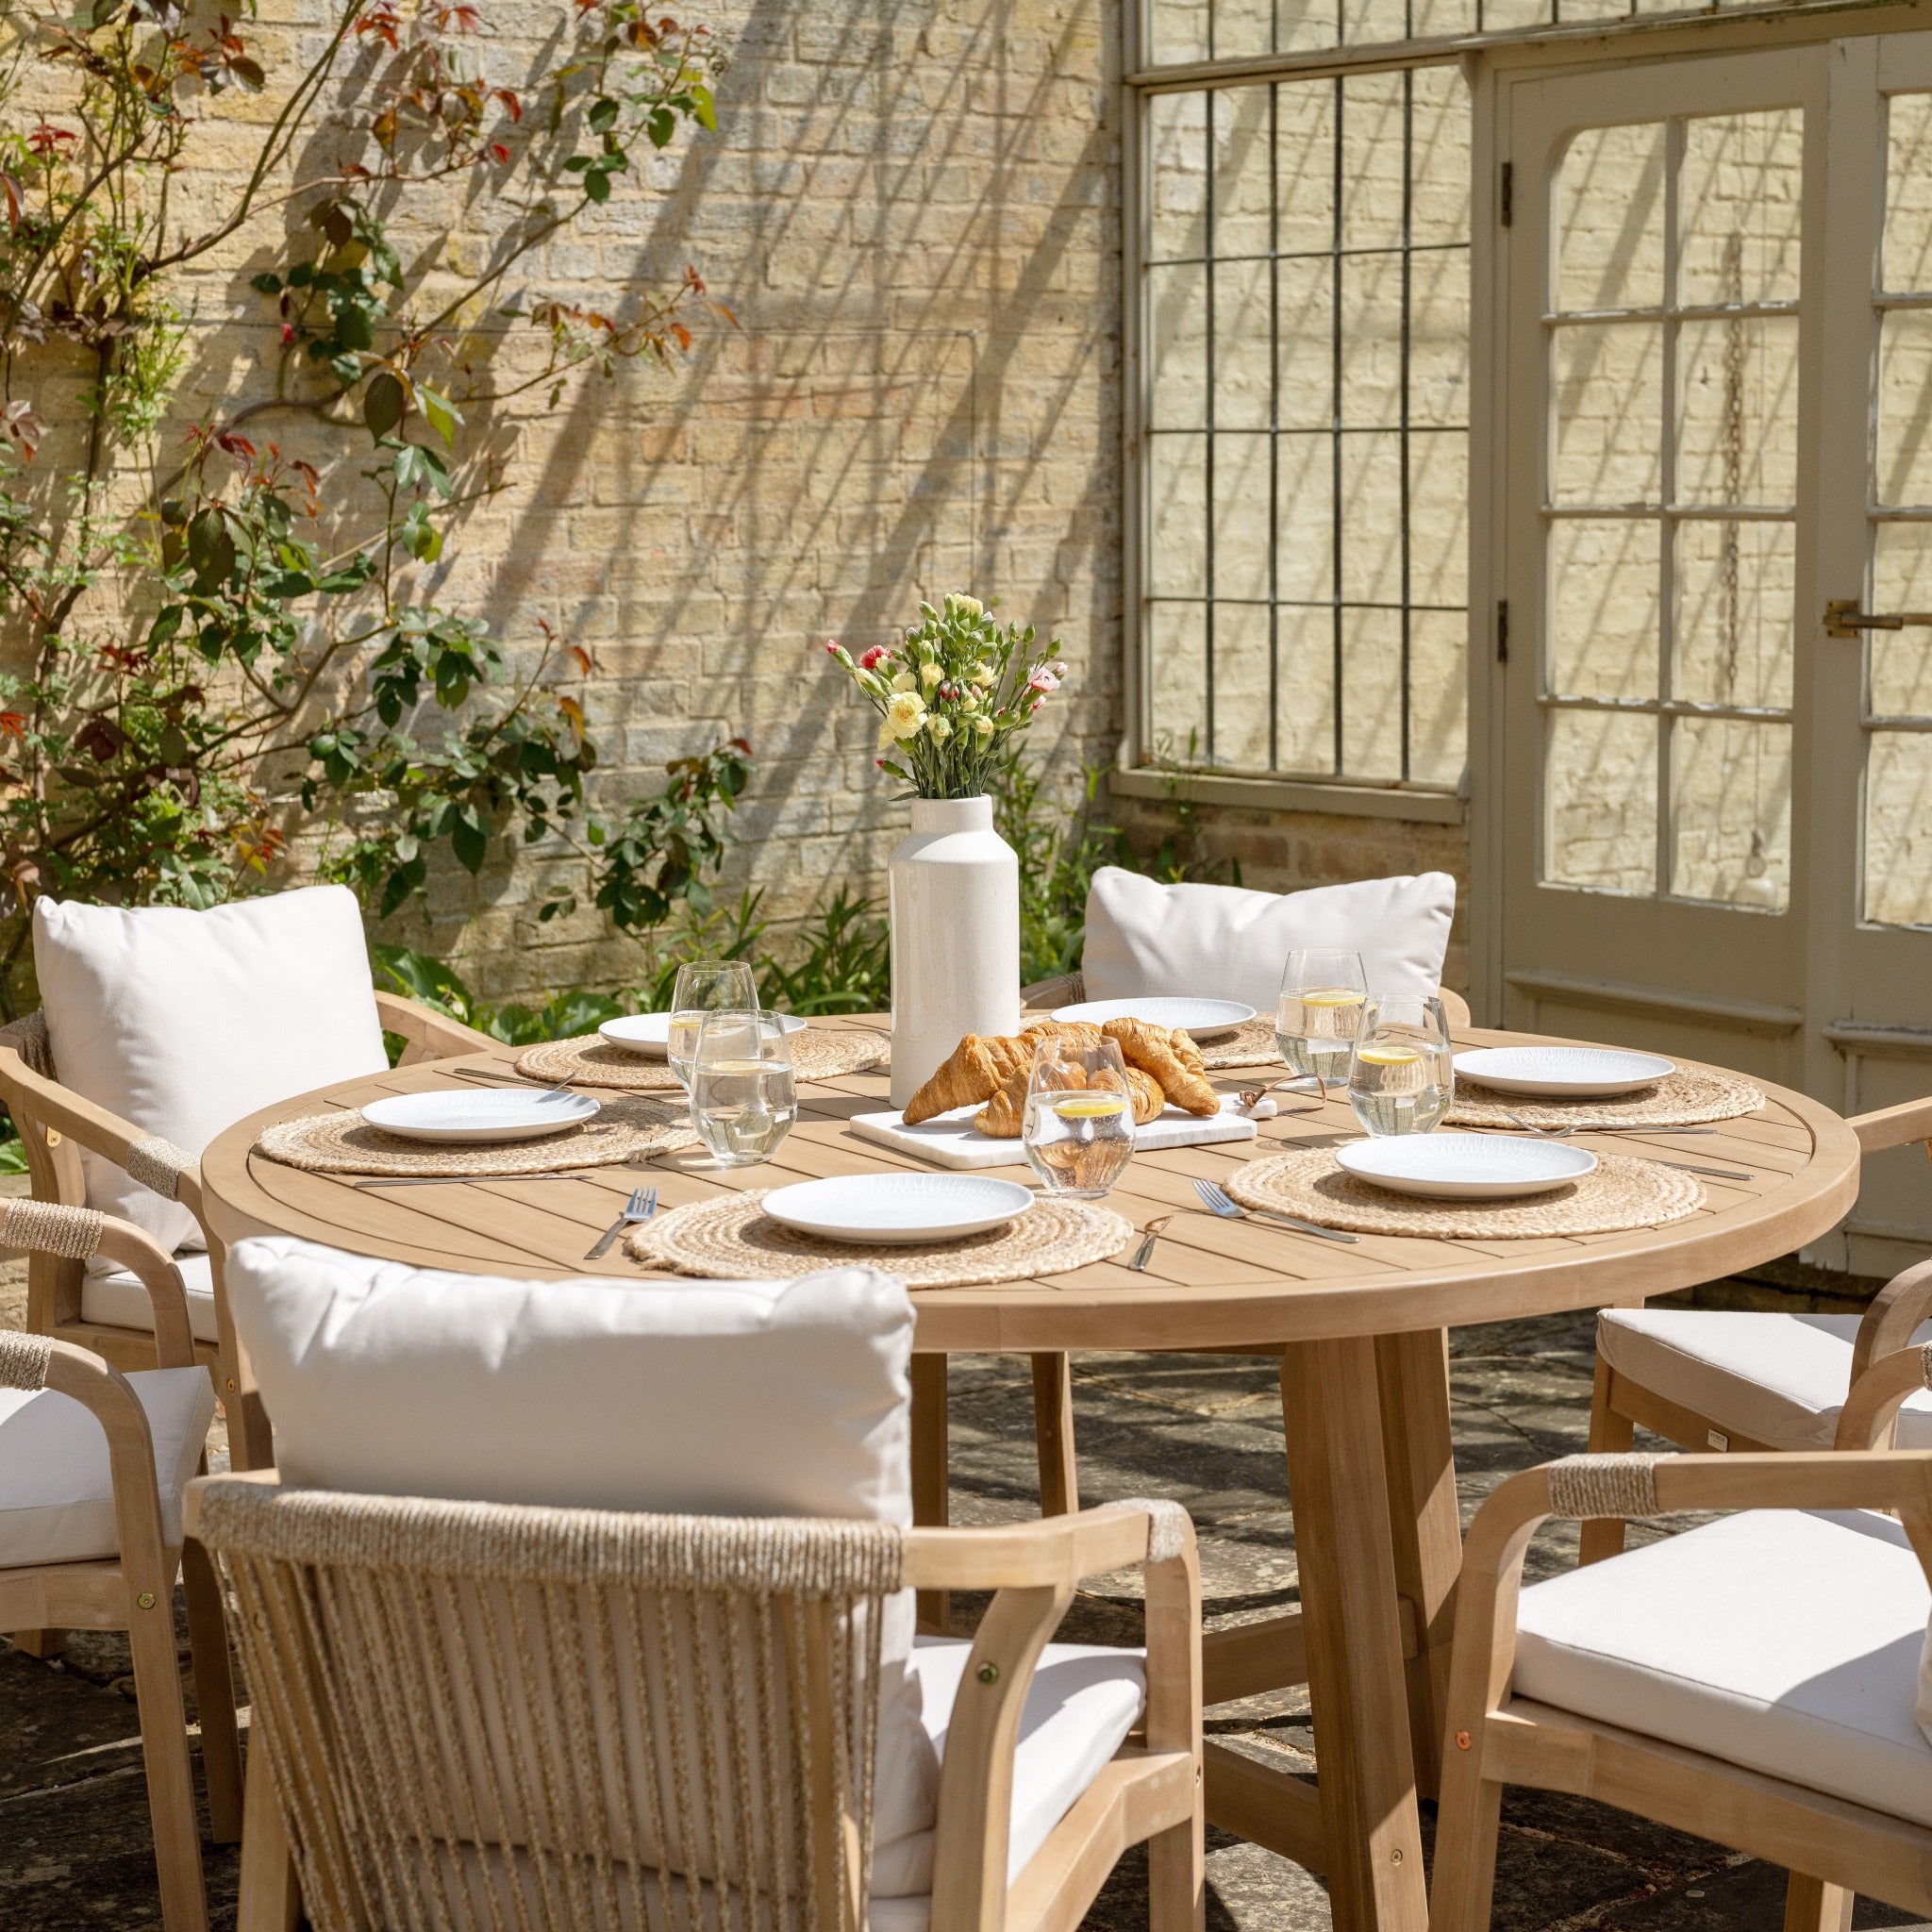 Quay 6 Seat Round Dining Set in Linen